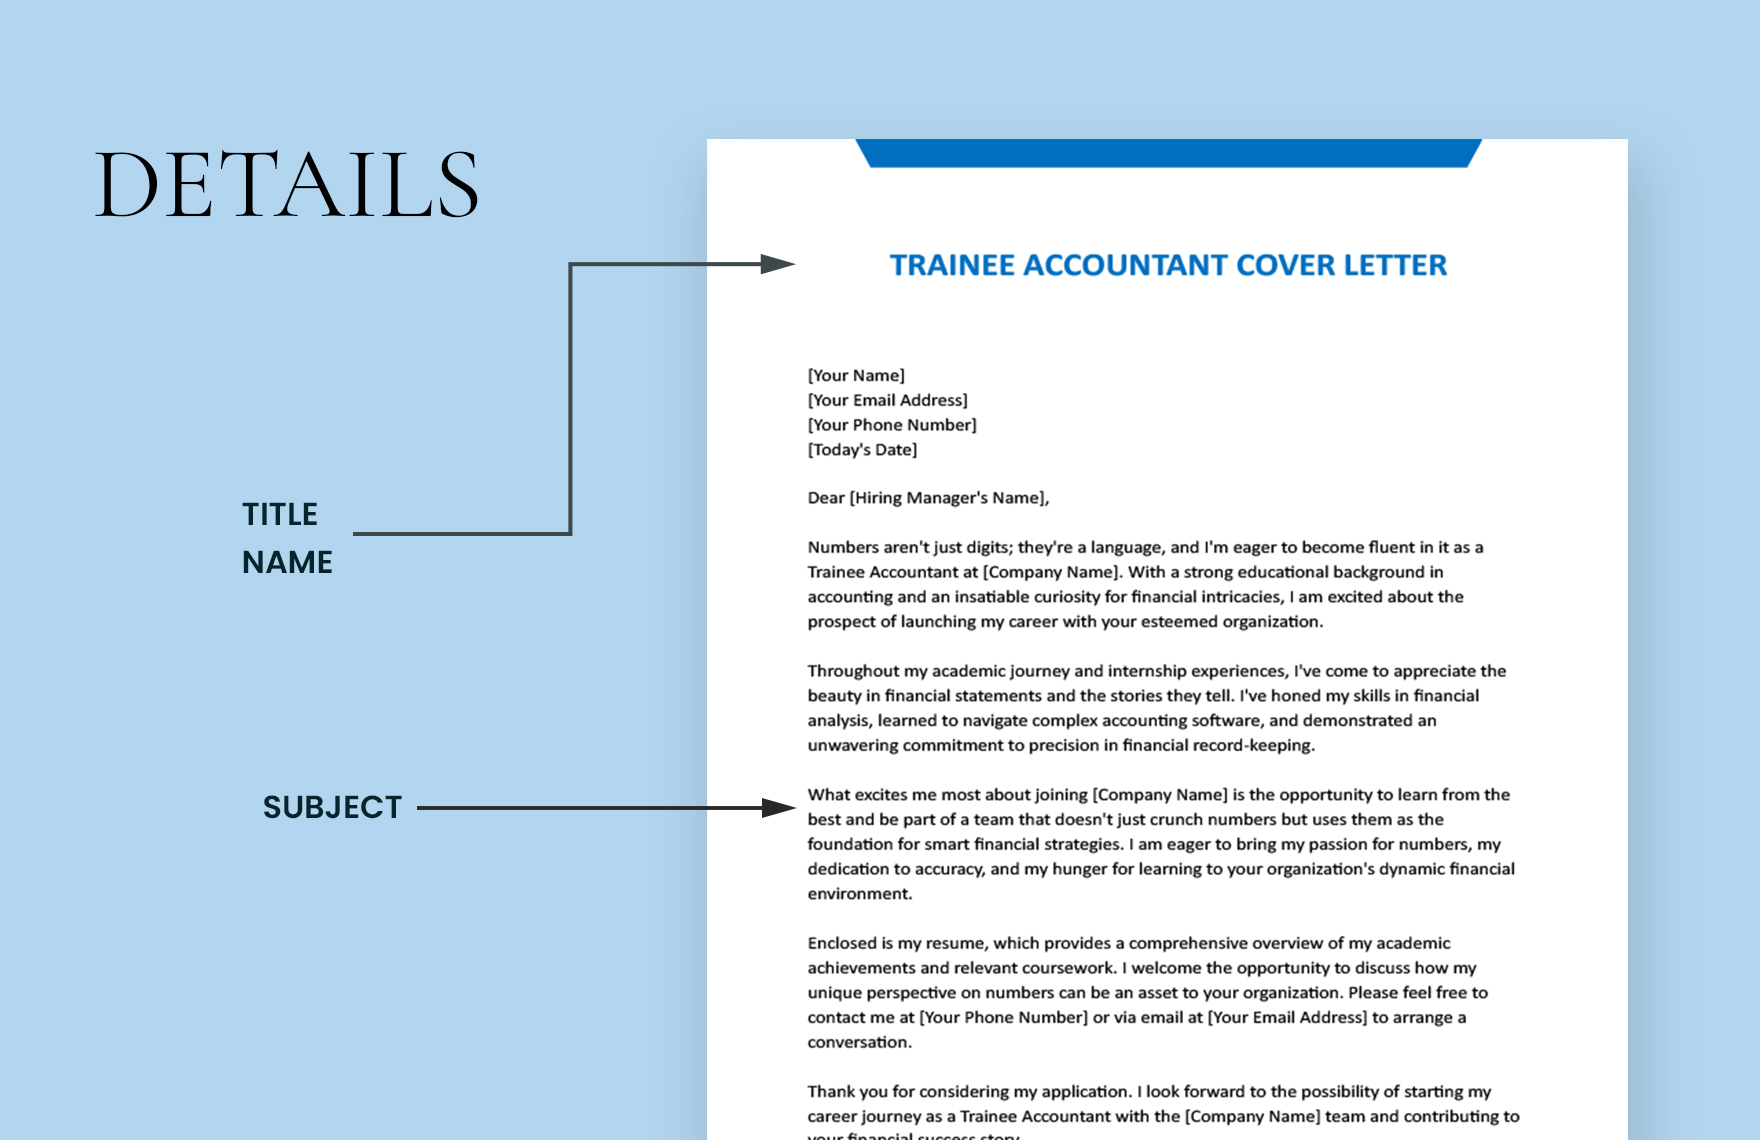 Trainee Accountant Cover Letter